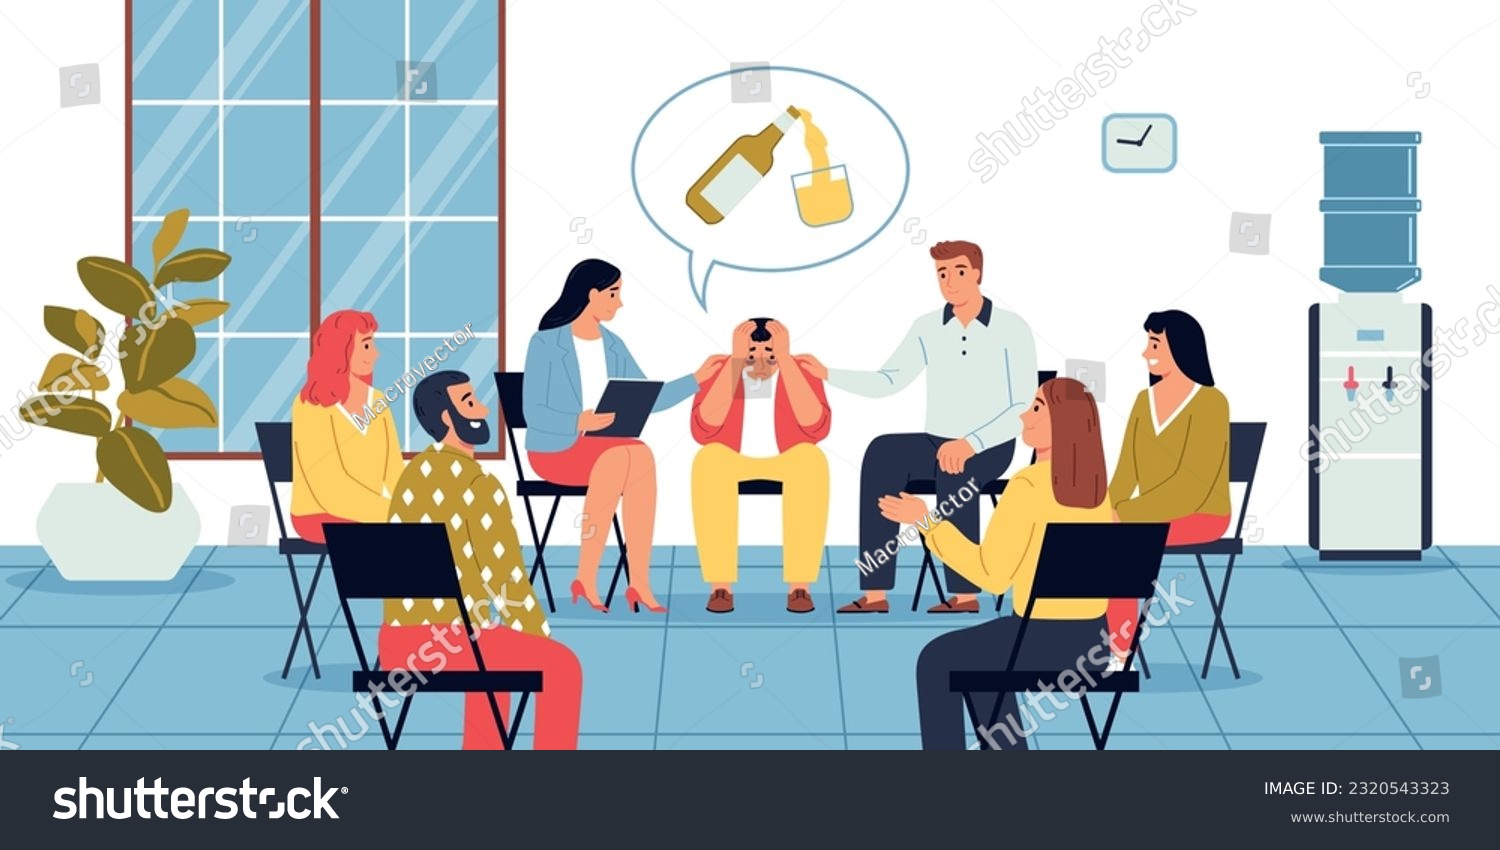 SVG of Group therapy in alcoholics anonymous club flat background with psychologist and people sitting in circle vector illustration svg